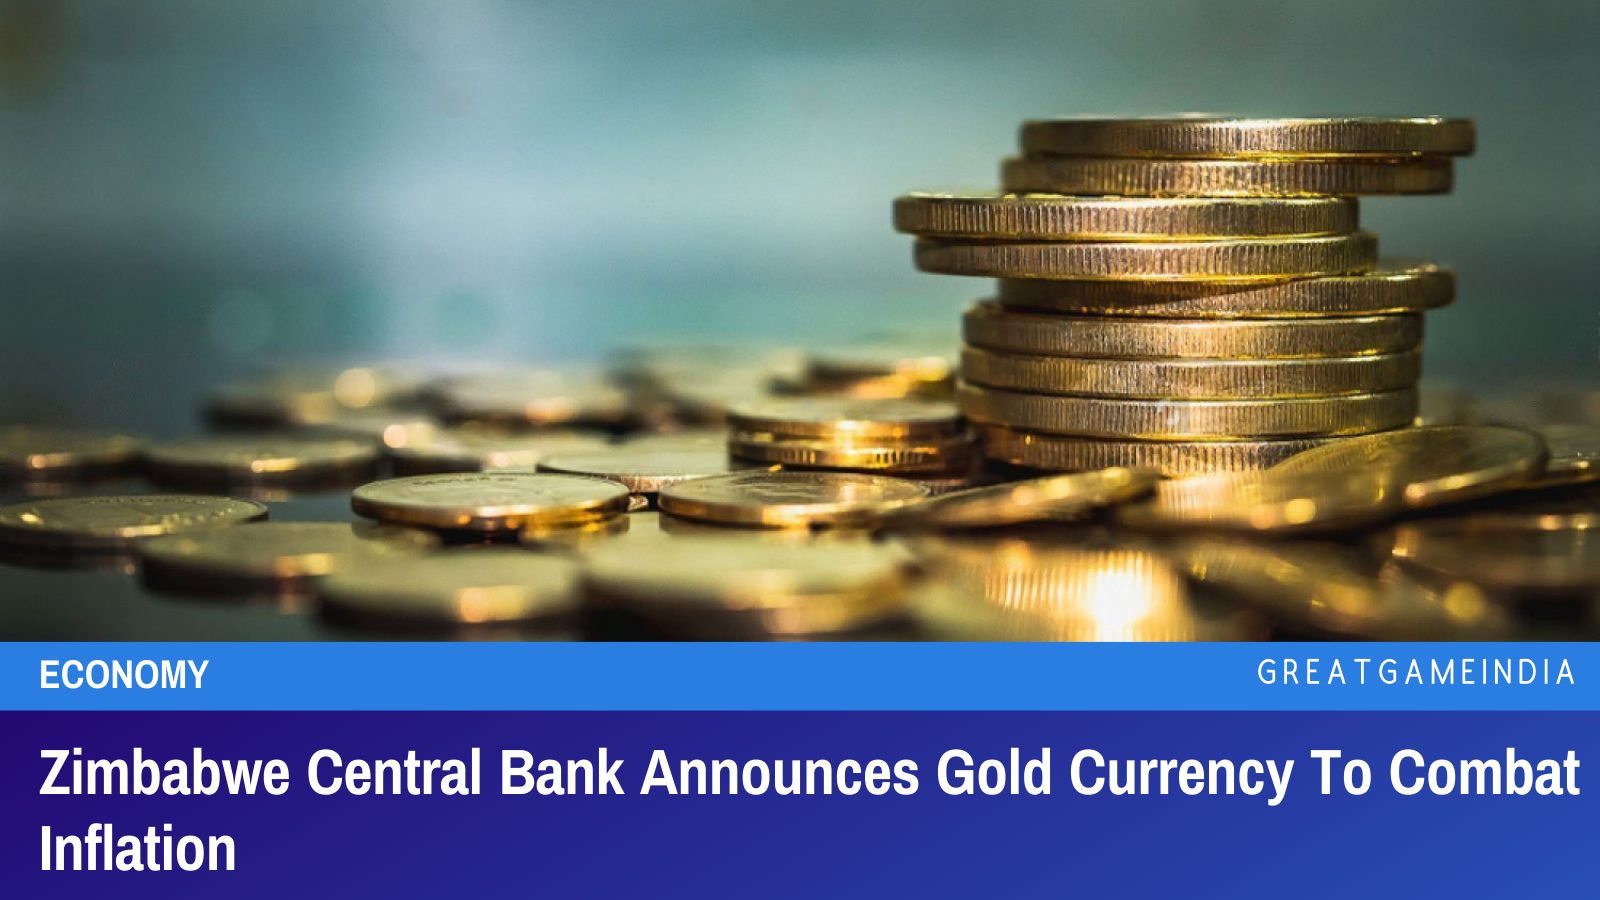 Zimbabwe Central Bank Announces Gold Currency To Combat Inflation